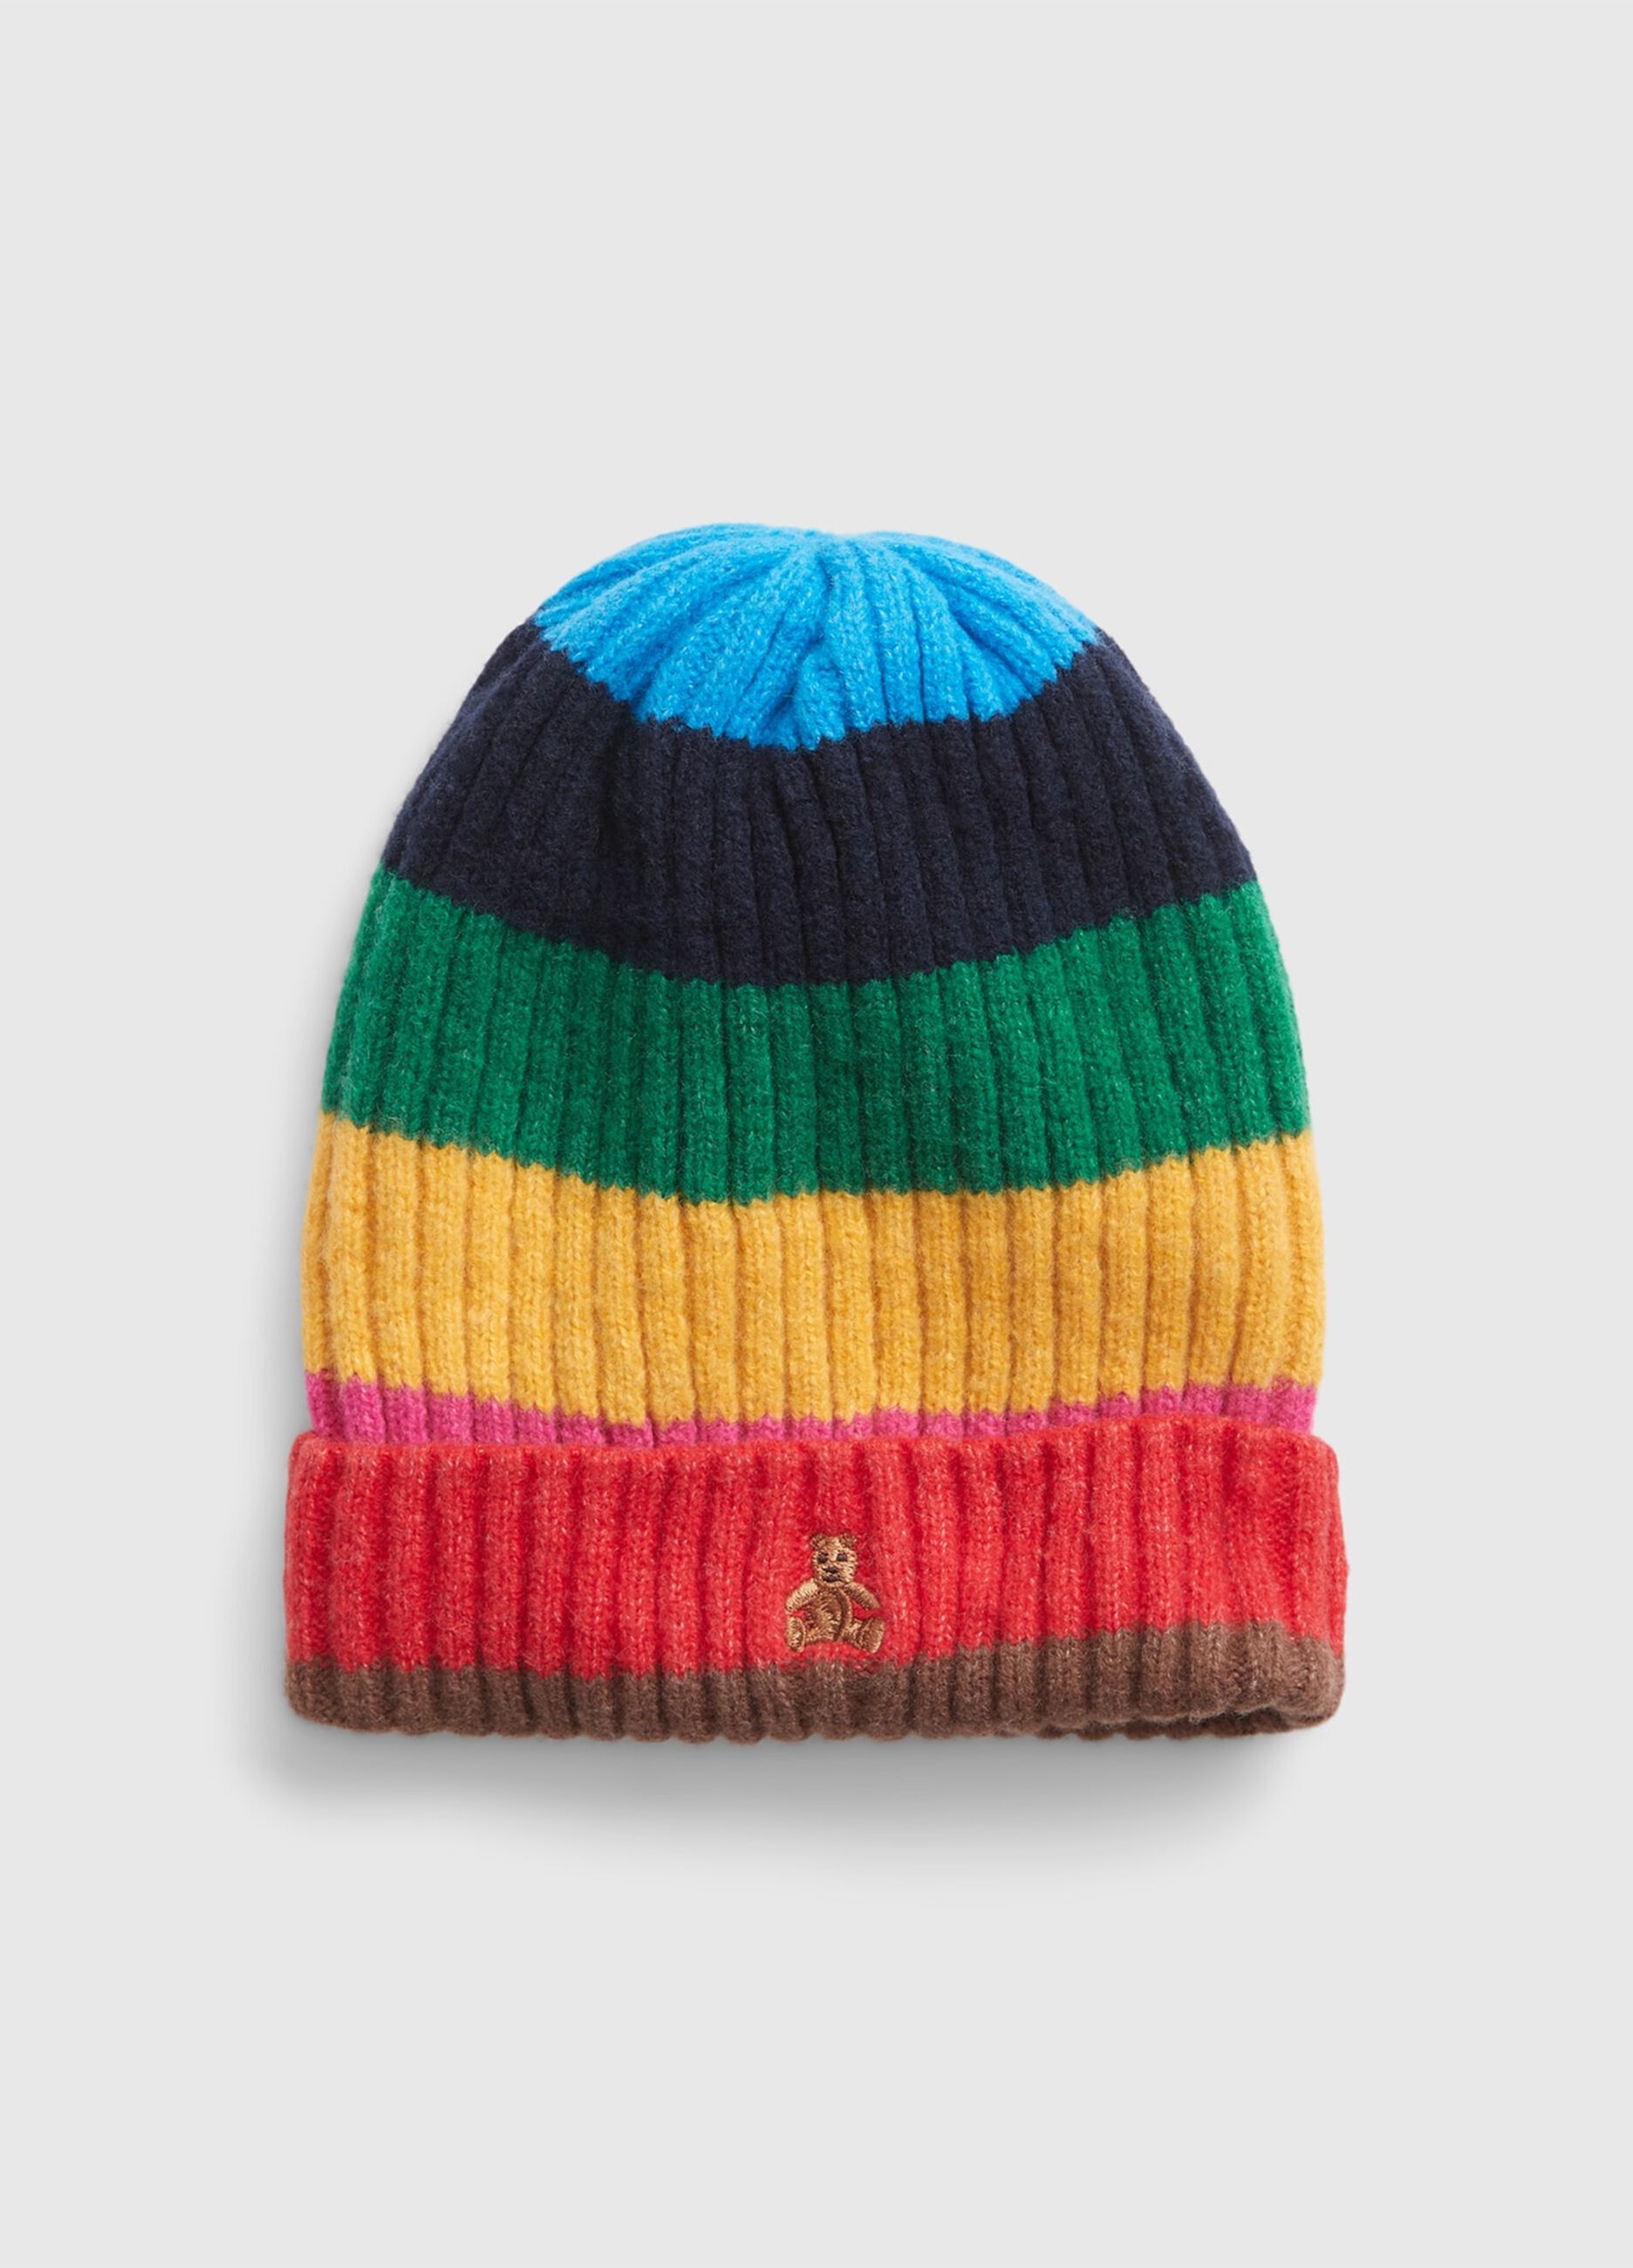 Happy Stripe hat with embroidered bear